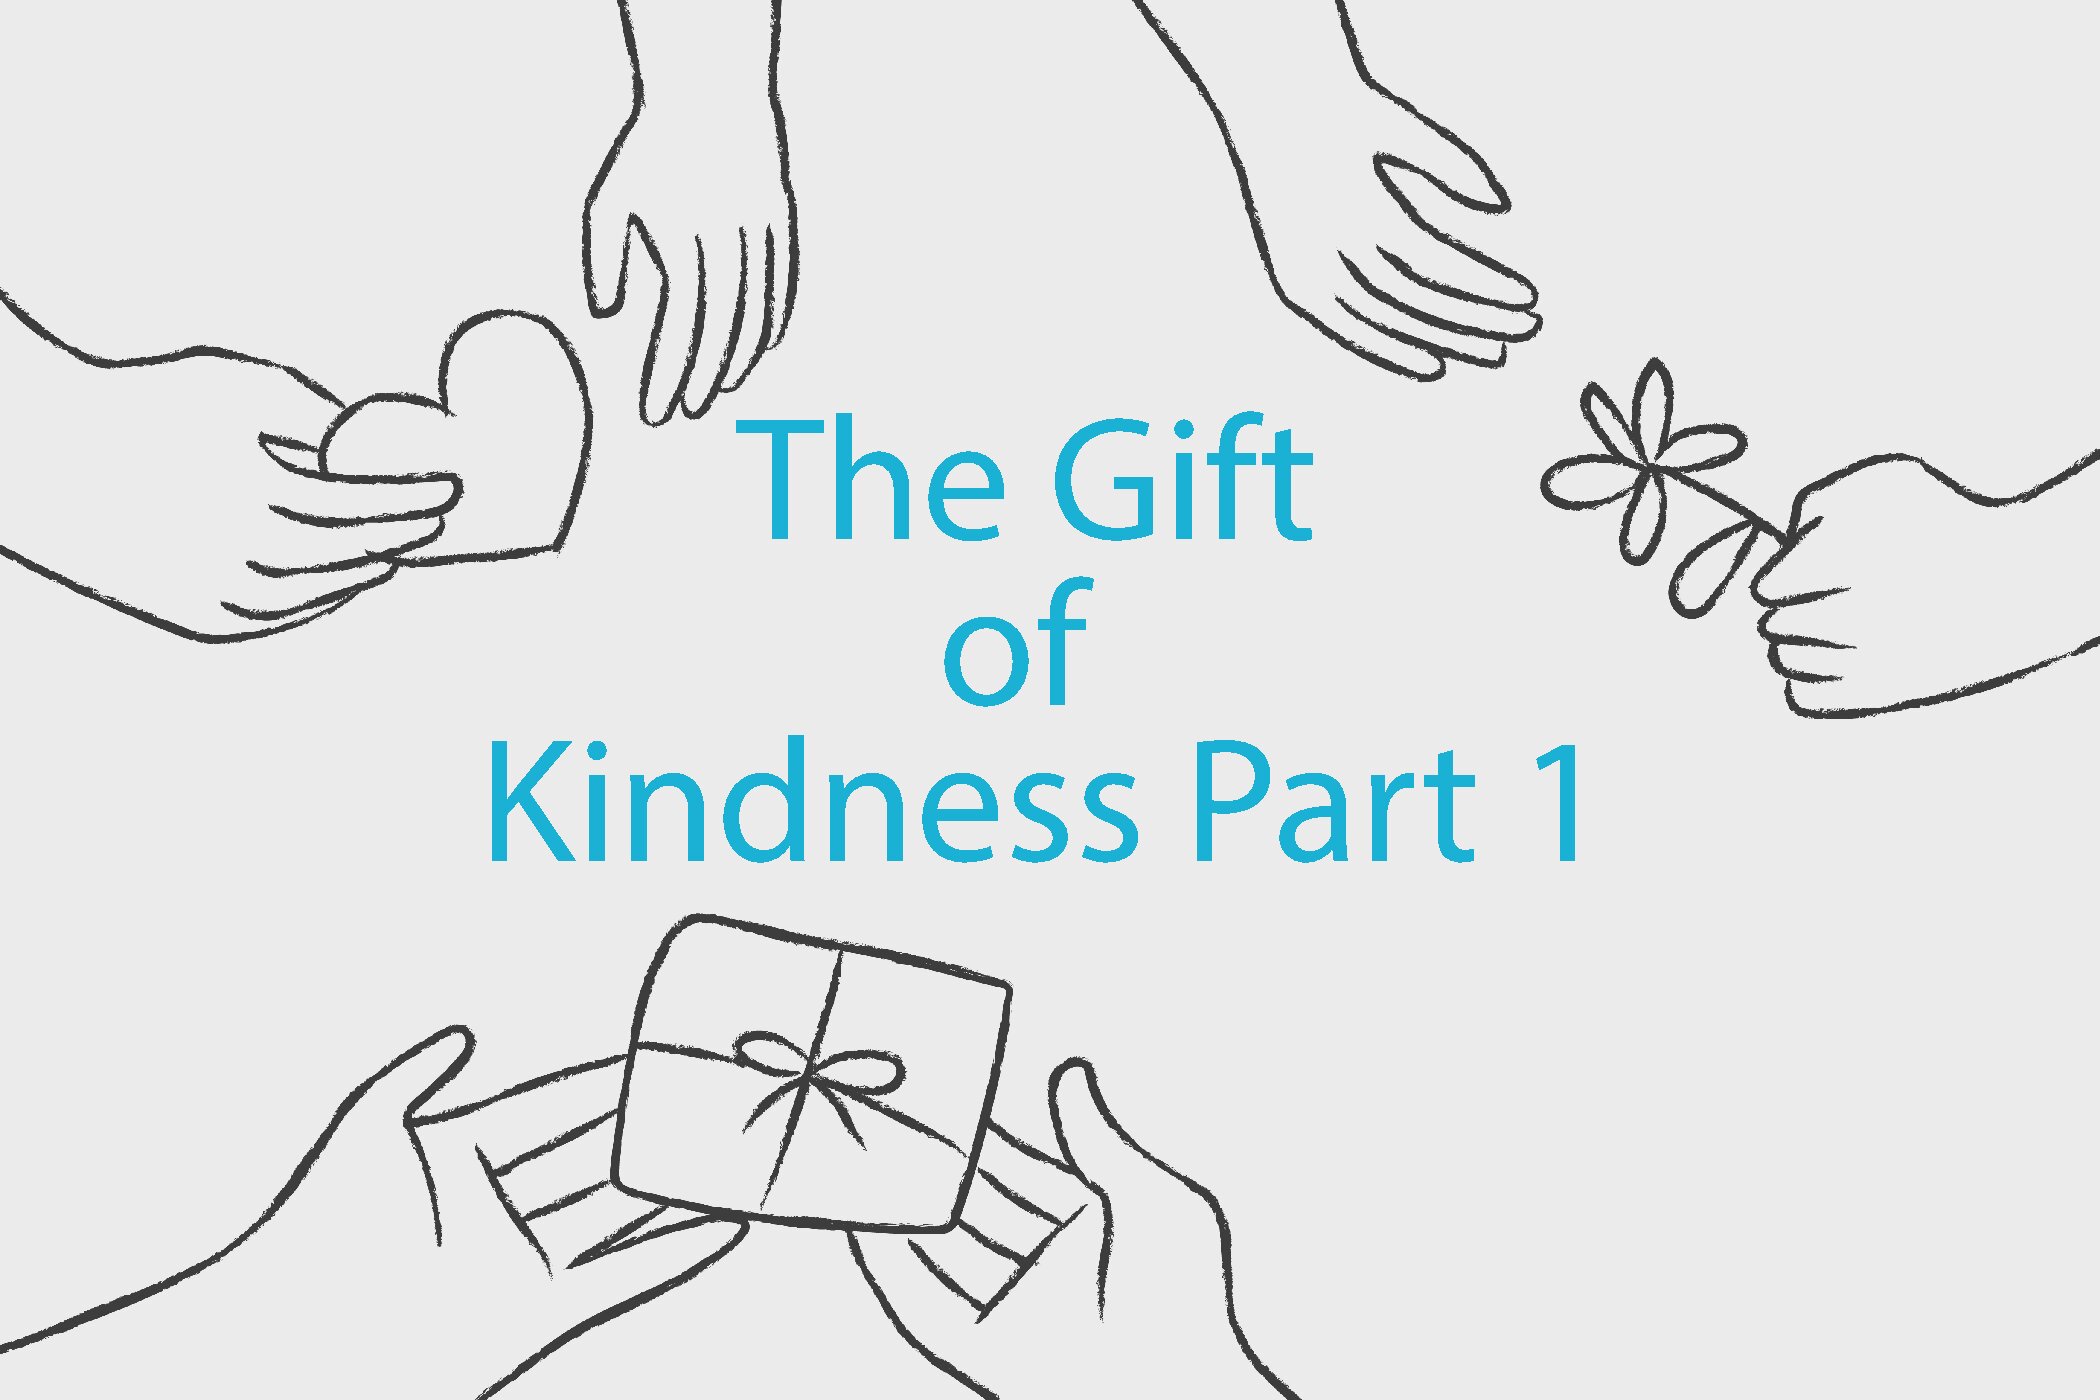 The Gift of Kindness Part 1